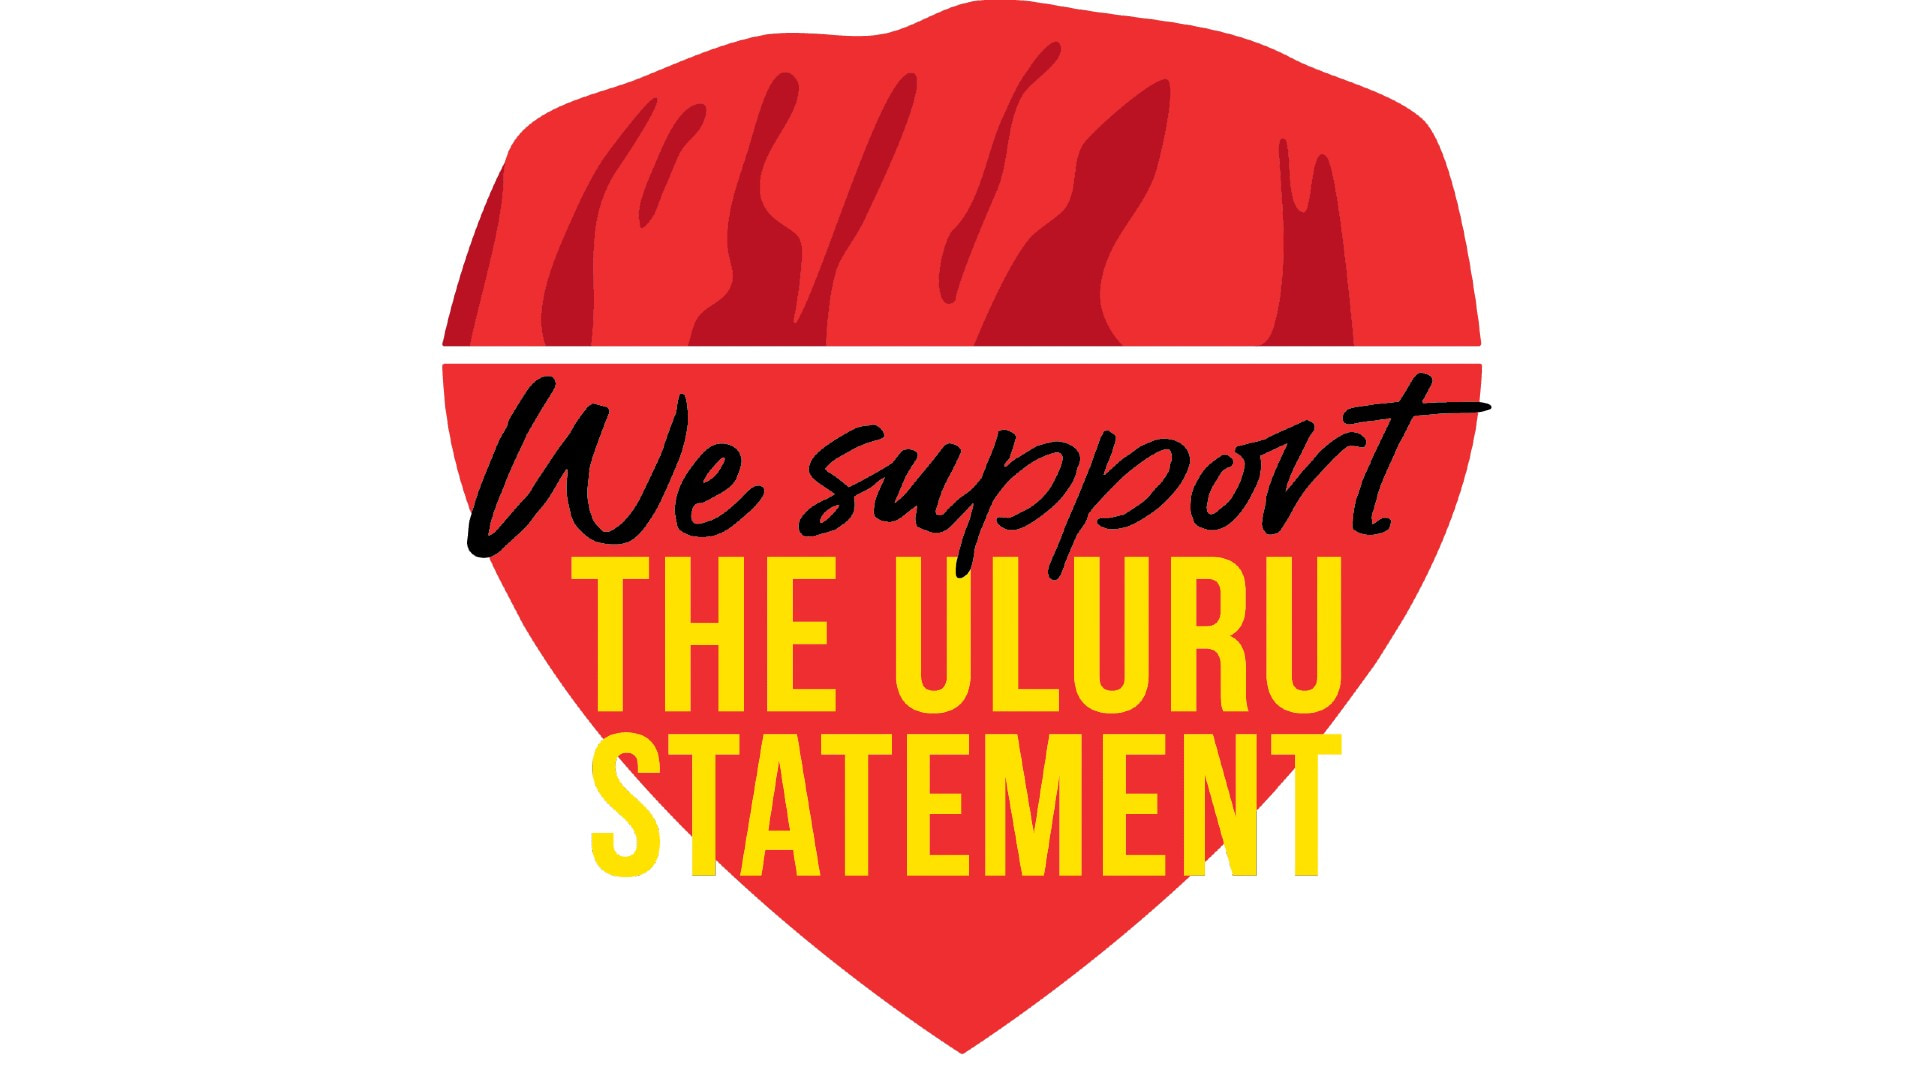 The logo for the Uluru Statement from the Heart against a white background.